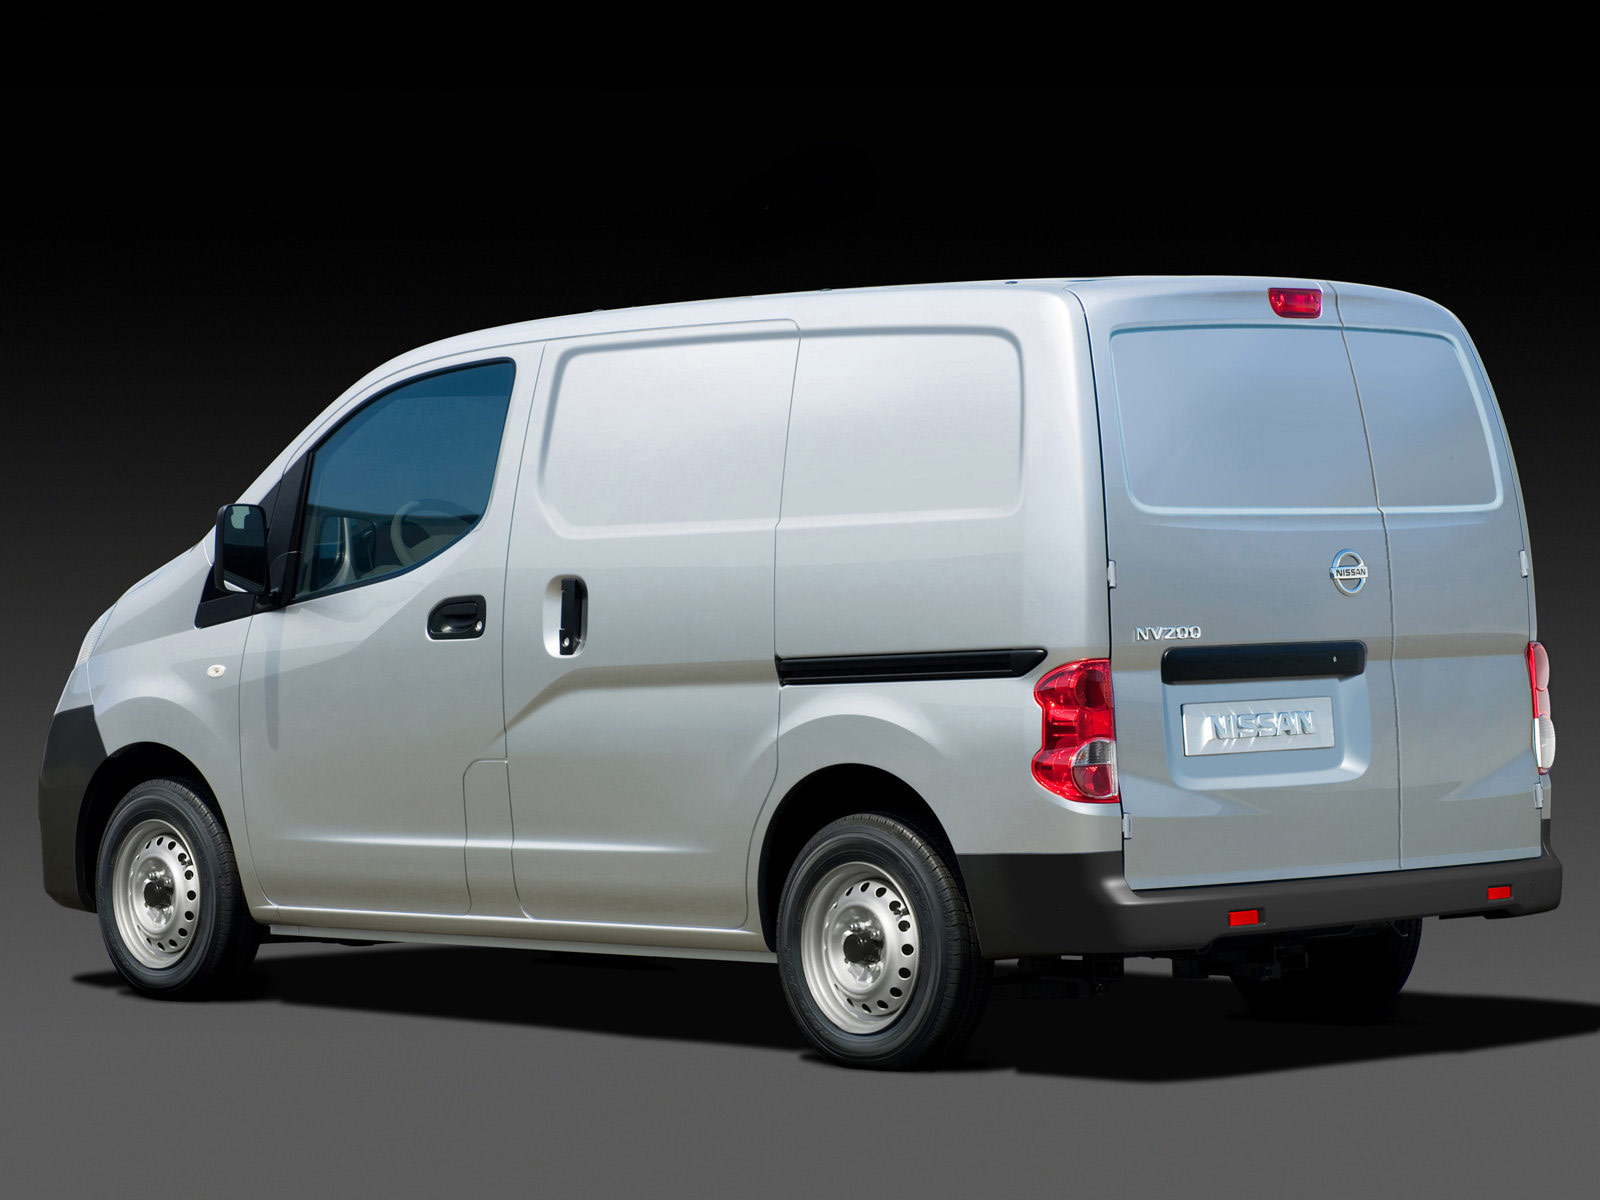 2010 NISSAN NV200 japan automobiles wallpapers, pictures